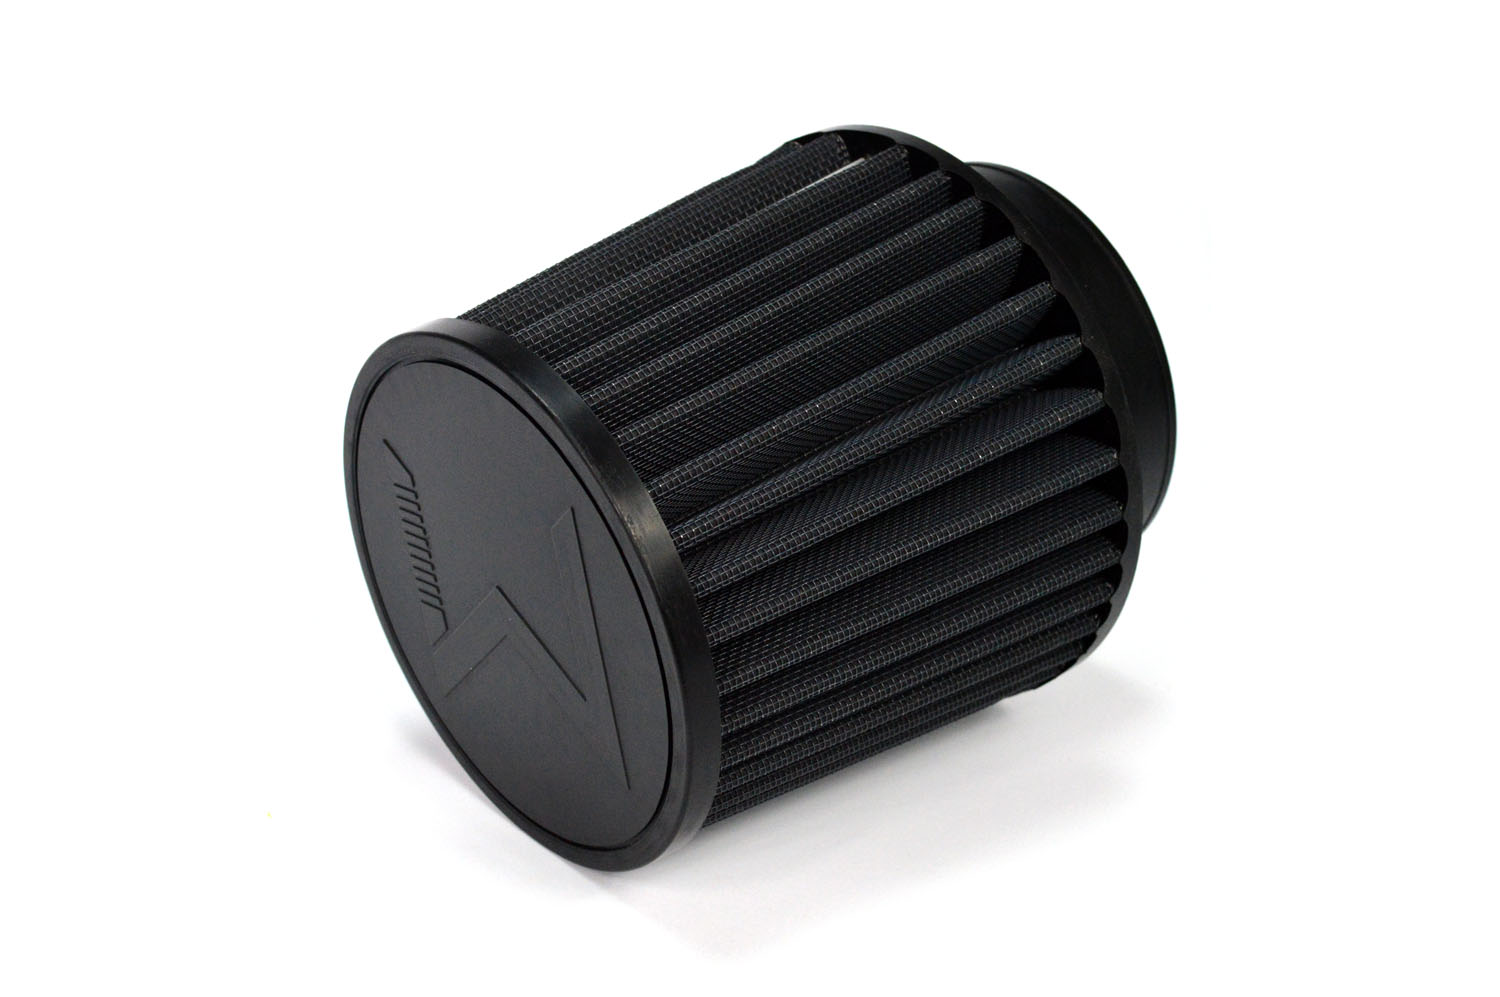 A reinforced Dryflow Air Filter is used for superior flow and filtration performance.